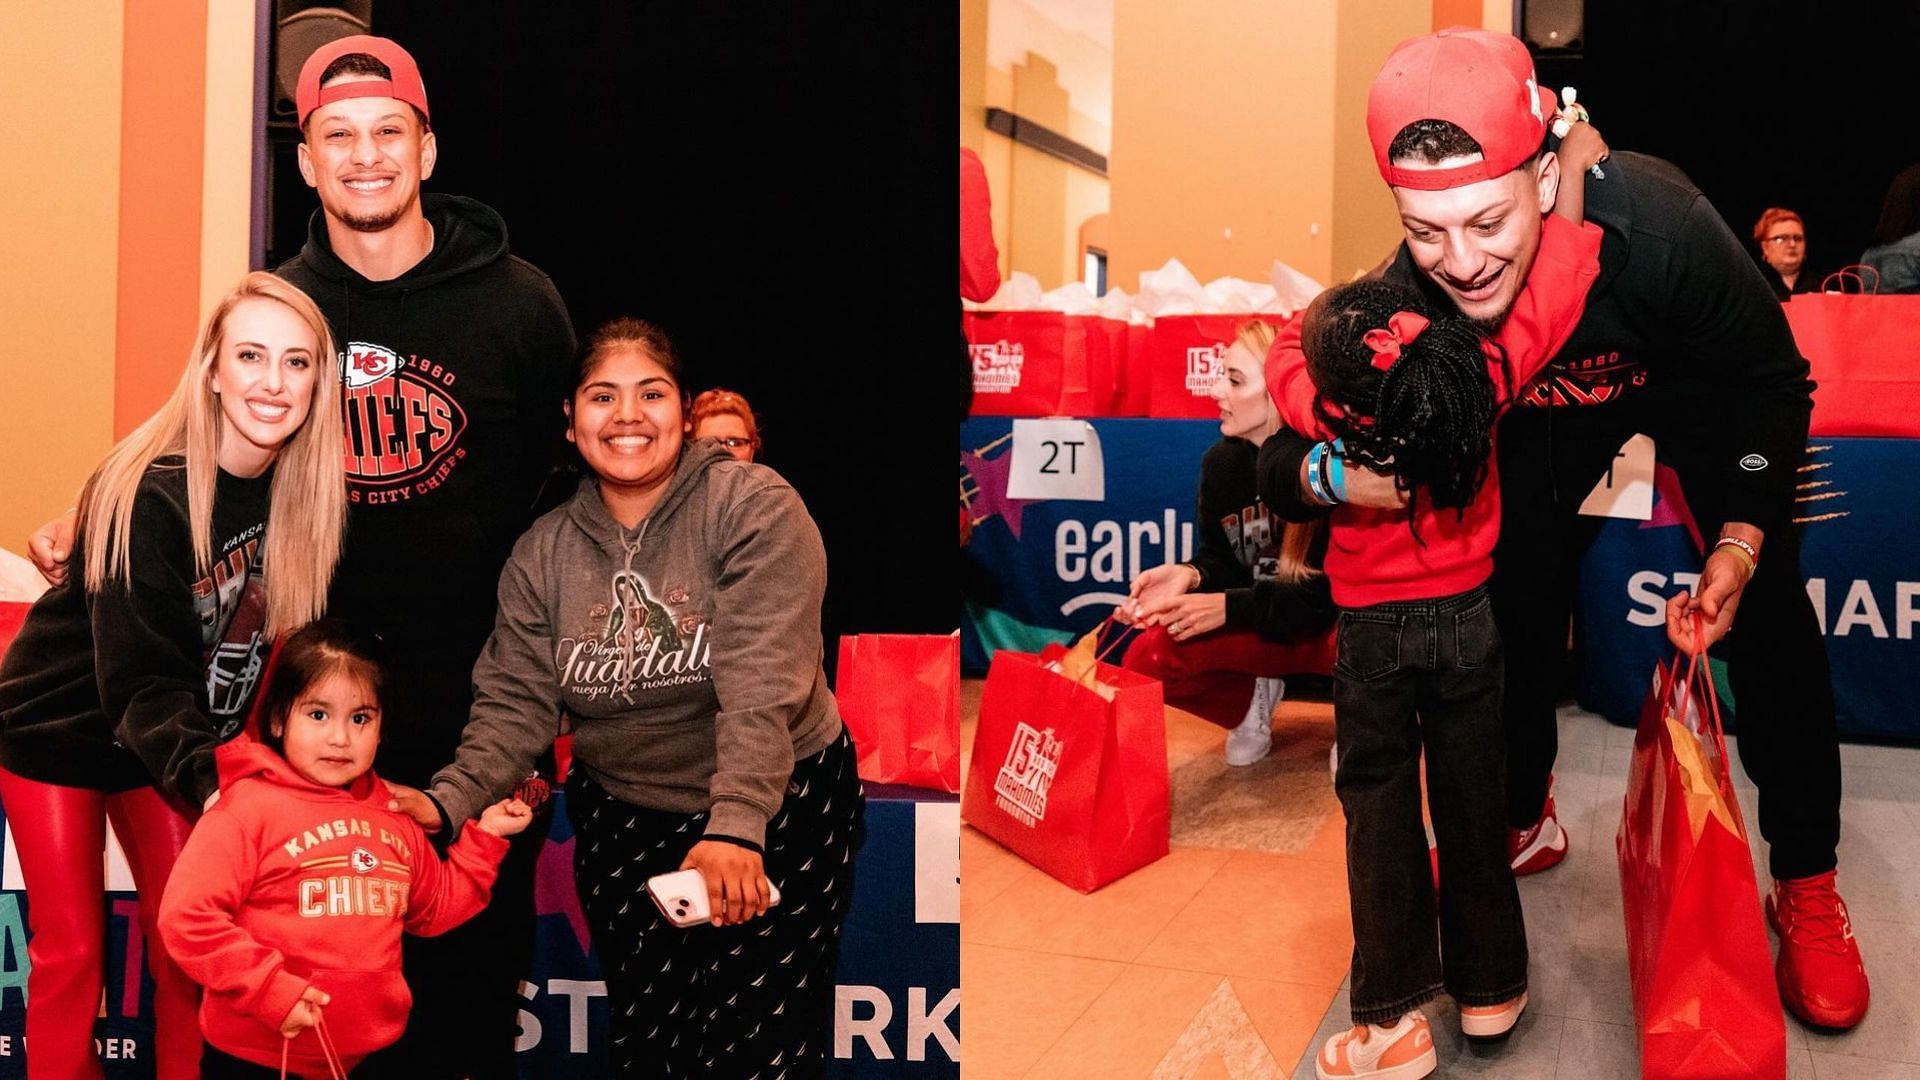 Patrick and Brittany Mahomes donate clothes and supplies to kids&rsquo; families ahead of Christmas. (Image credit: @15andmahomies on Instagram)